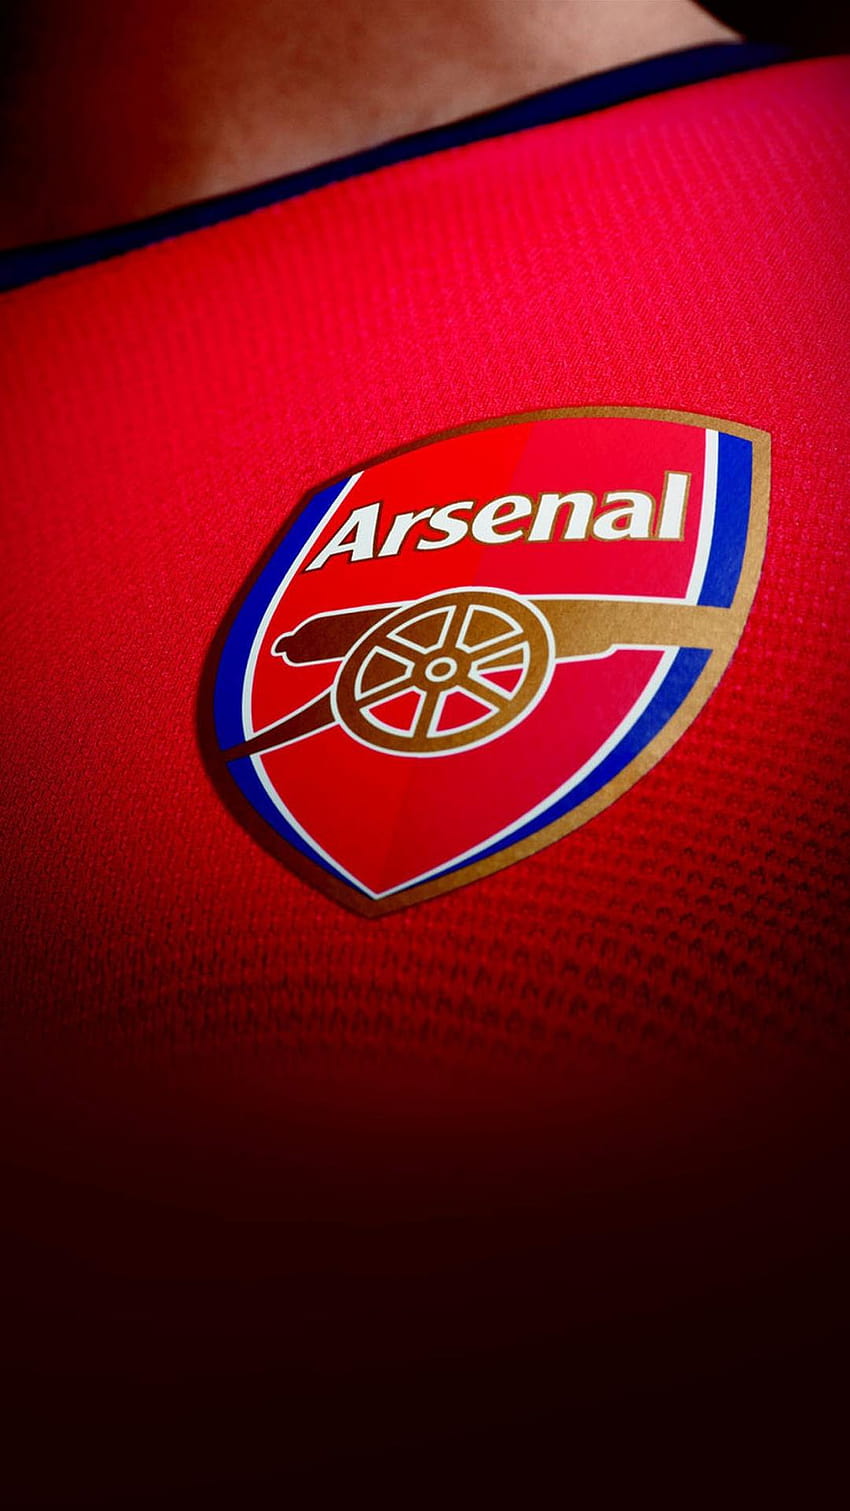 Arsenal Wallpaper HD For Iphone X series | Arsenal wallpapers, Arsenal,  Arsenal fc